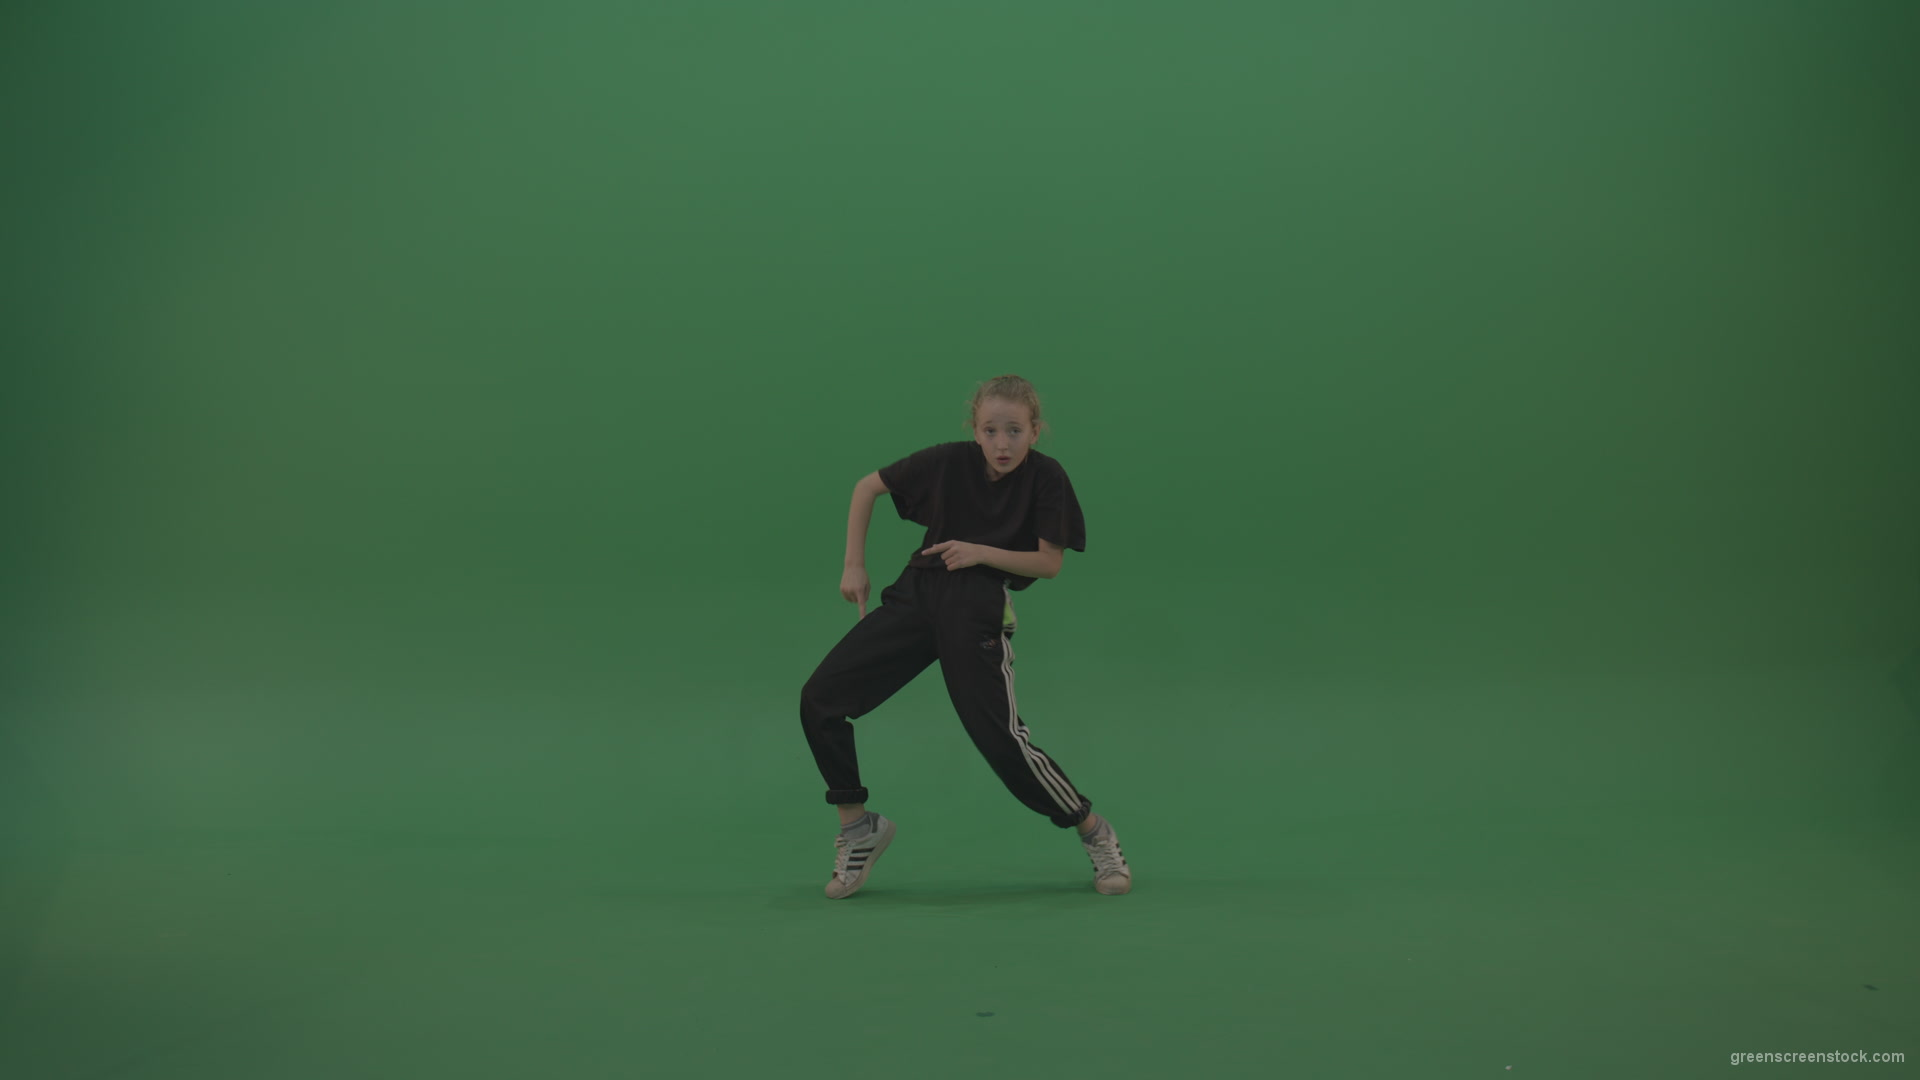 vj video background Incredible_Dance_Hip_Hop_Moves_From_Young_SmalKid_Female_Wearing_Black_Sweat_Suite_And_White_Trainers_On_Green_Screen_Wall_Background_003